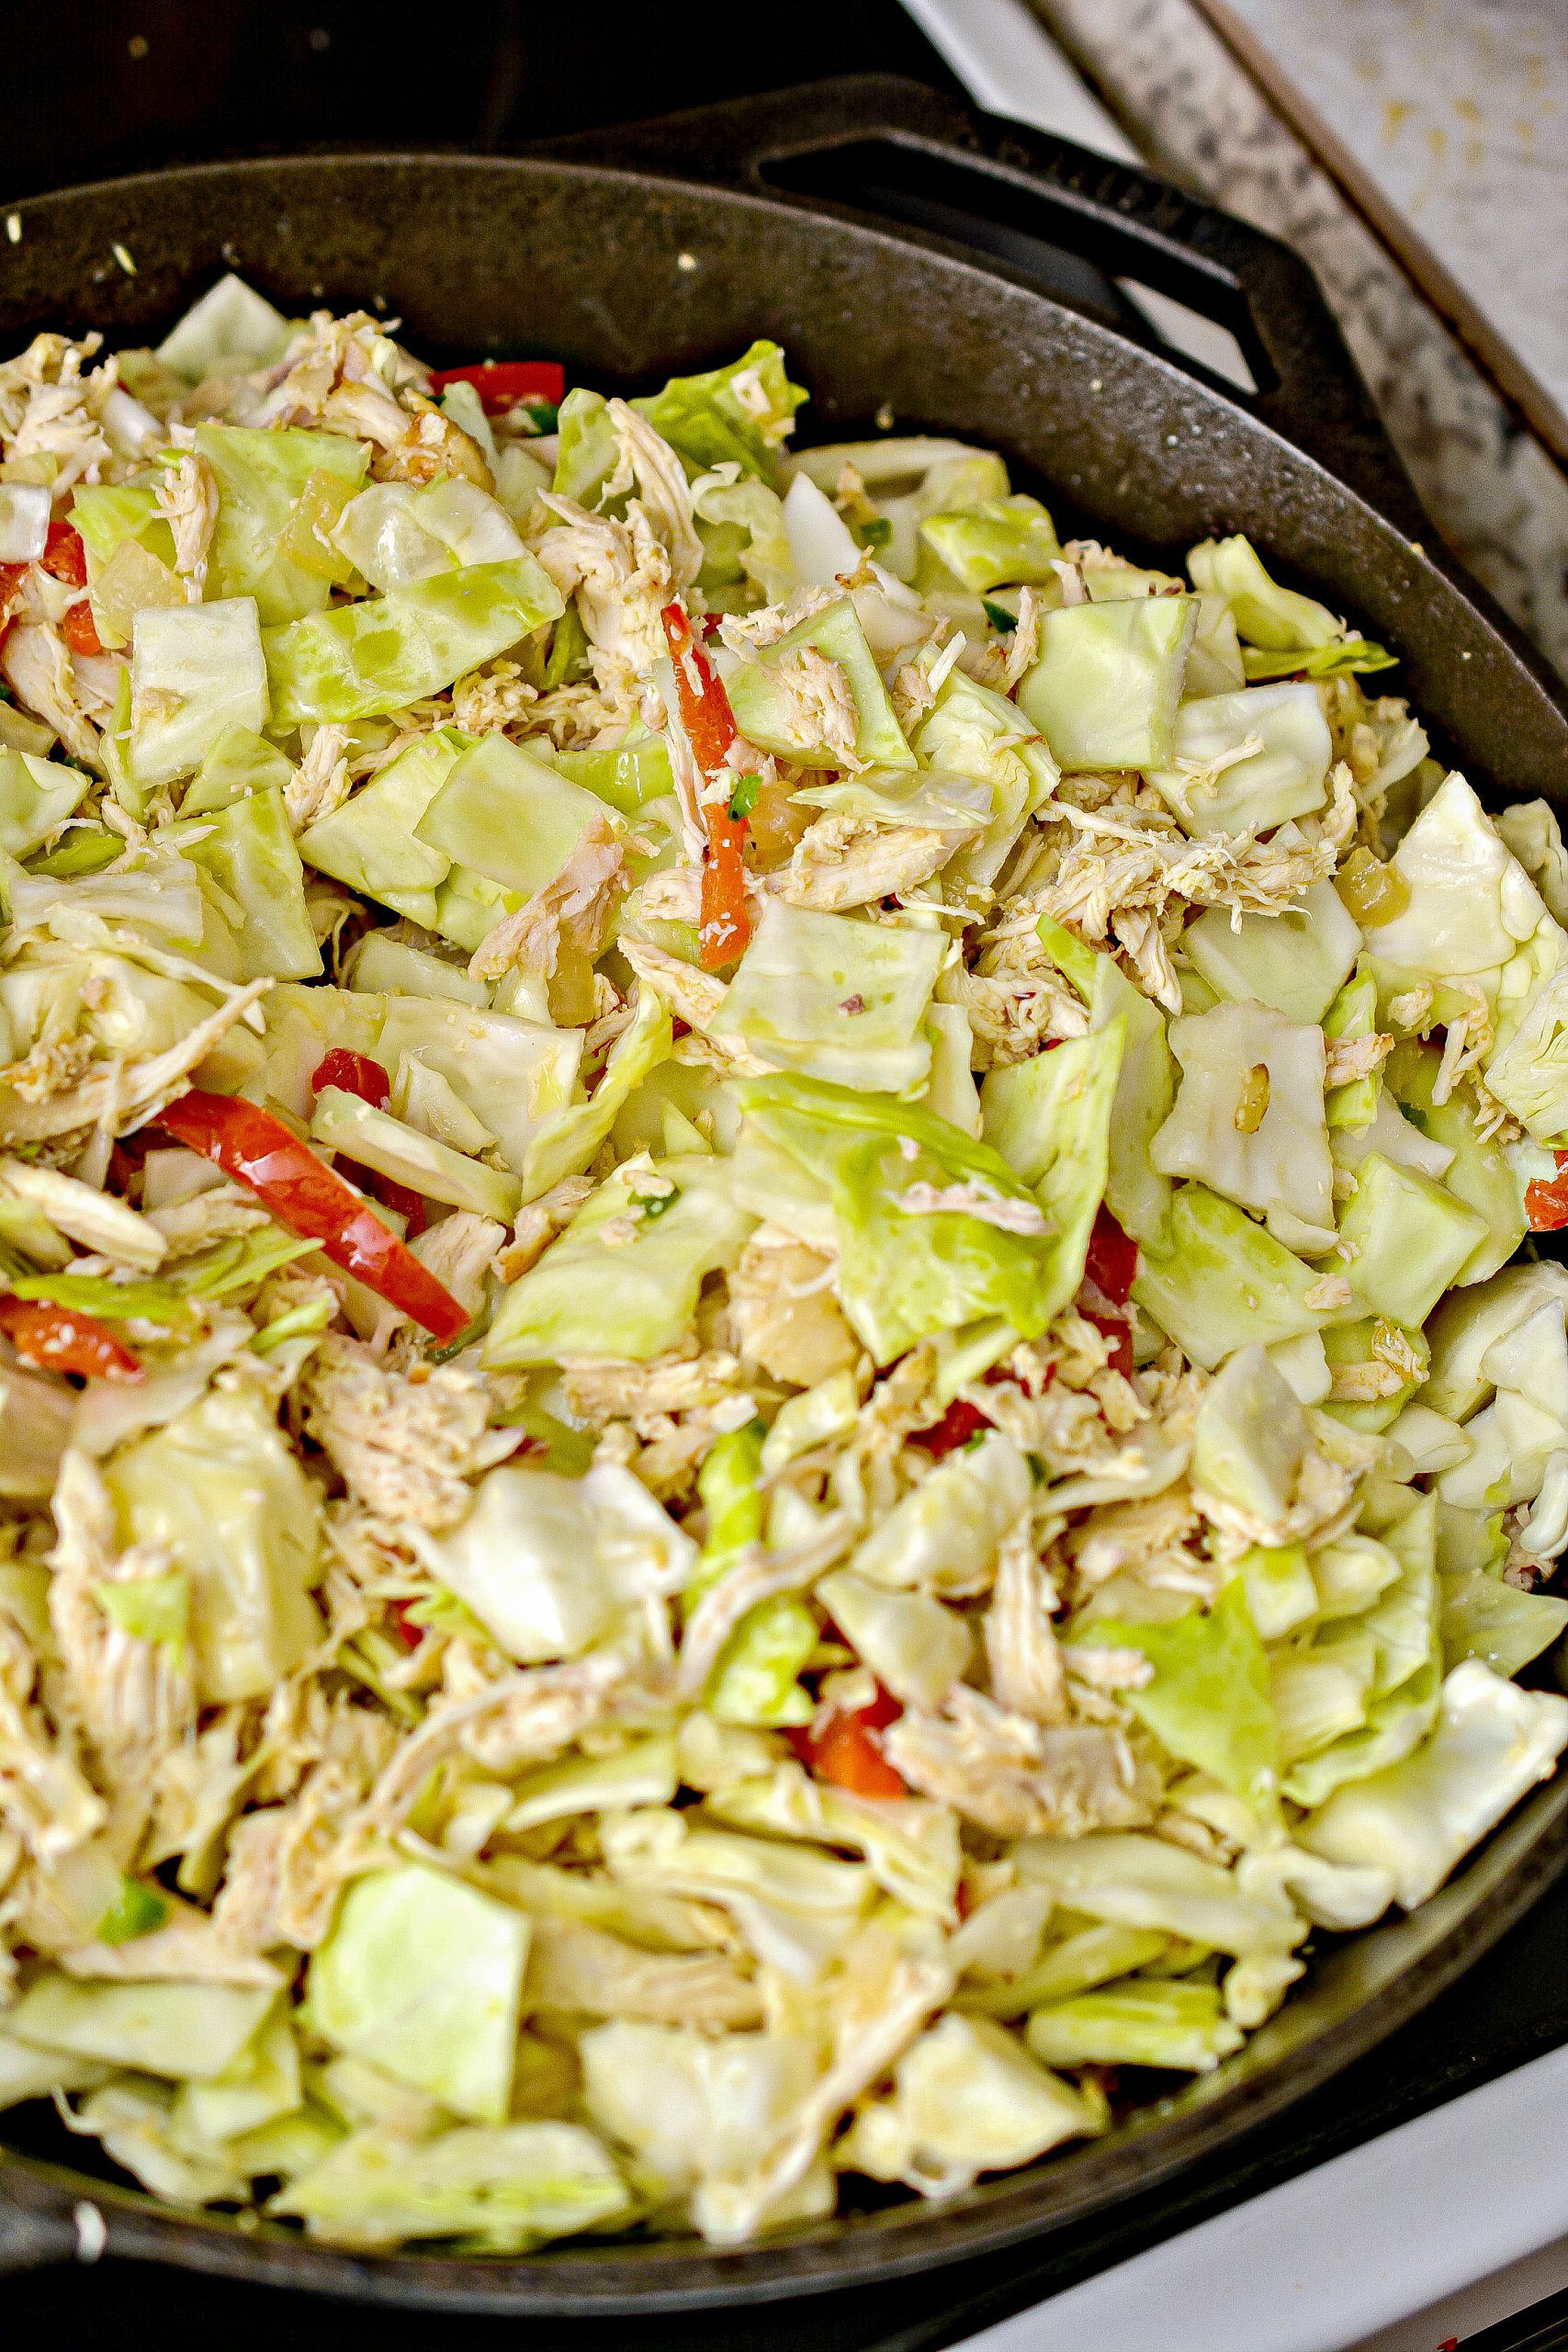 Add the chicken and cabbage to the skillet, tossing to mix well